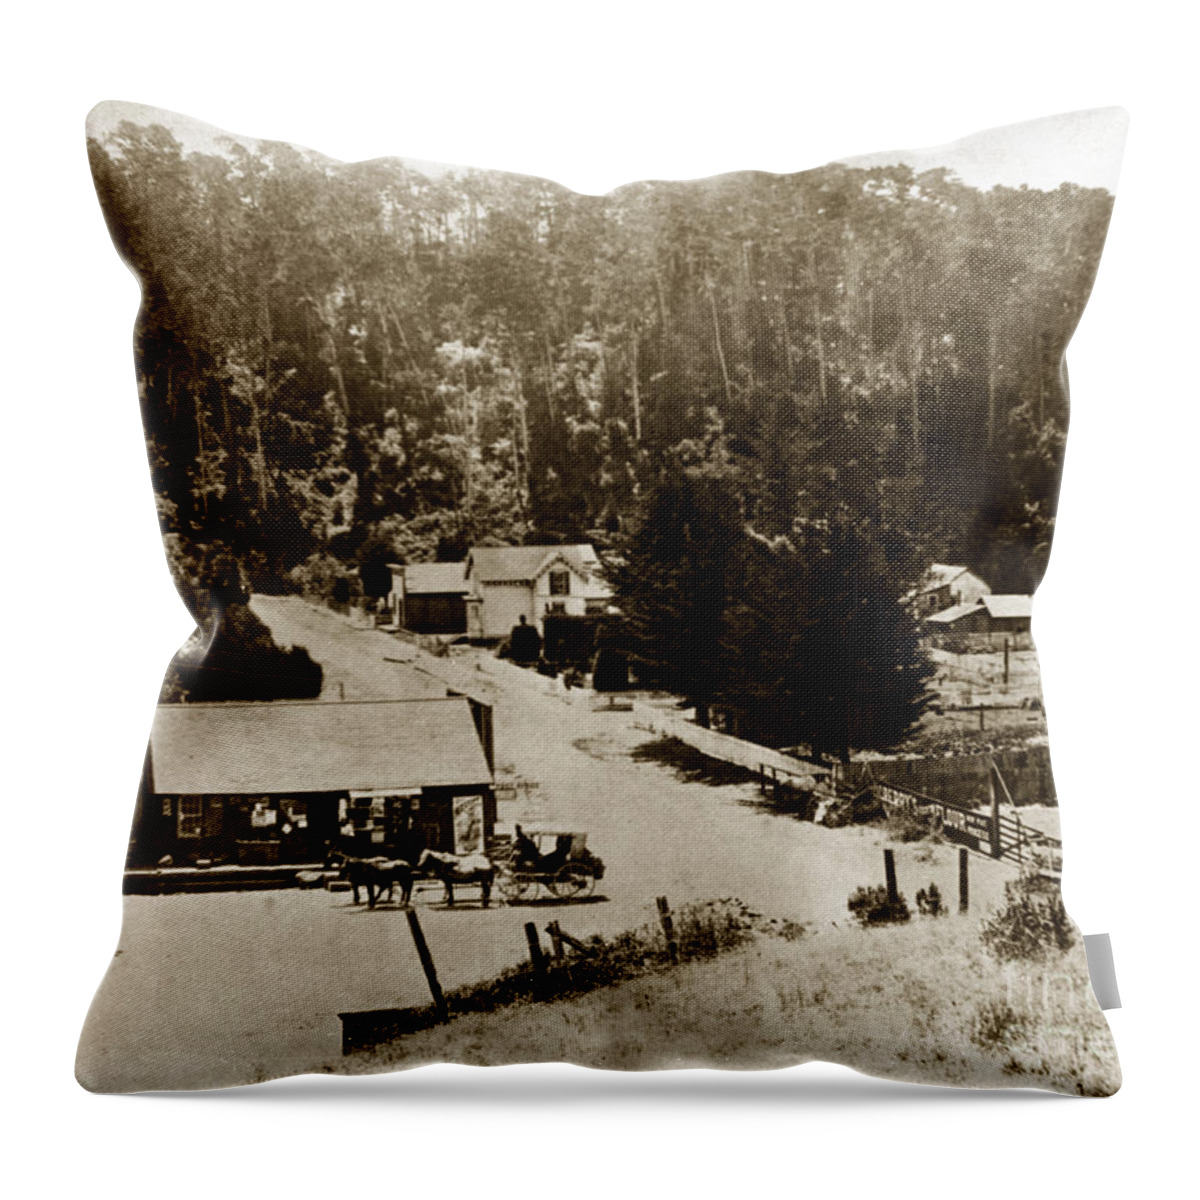 San Luis Obispo County Throw Pillow featuring the photograph Cambrian San Luis Obispo County circa 1900 by Monterey County Historical Society